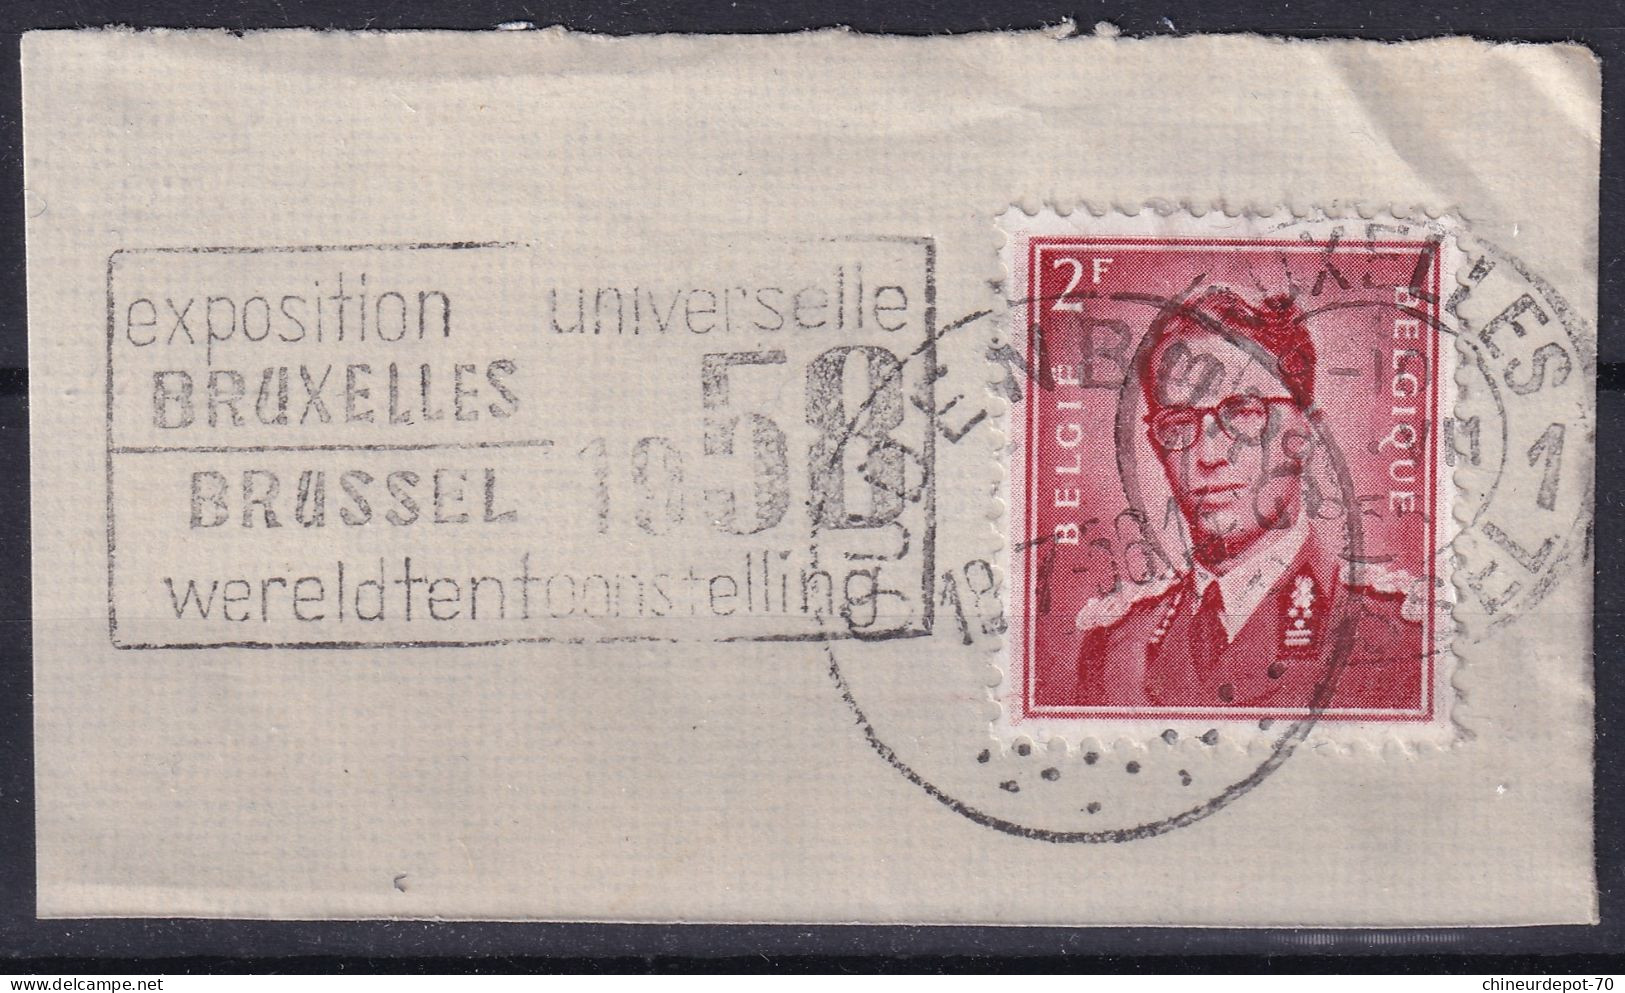 Timbre Belge ROI BAUDOUIN LUNETTE TYPE MARCHAND EXPOSITION BRUXELLES 1958 OUDENBERG - Used Stamps